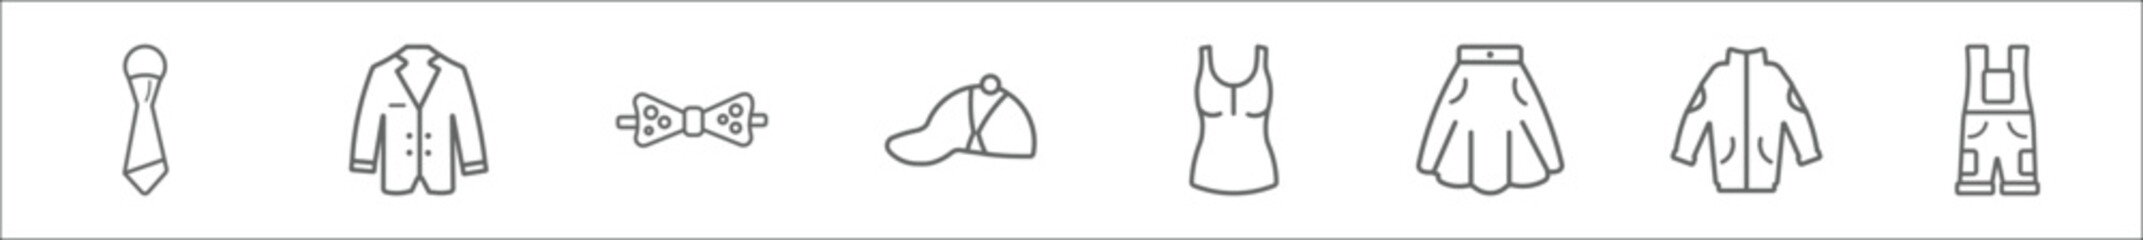 outline set of clothes line icons. linear vector icons such as necktie, suit jacket, butterfly tie, cap, tank top, skirt, jogging jacket, dungarees